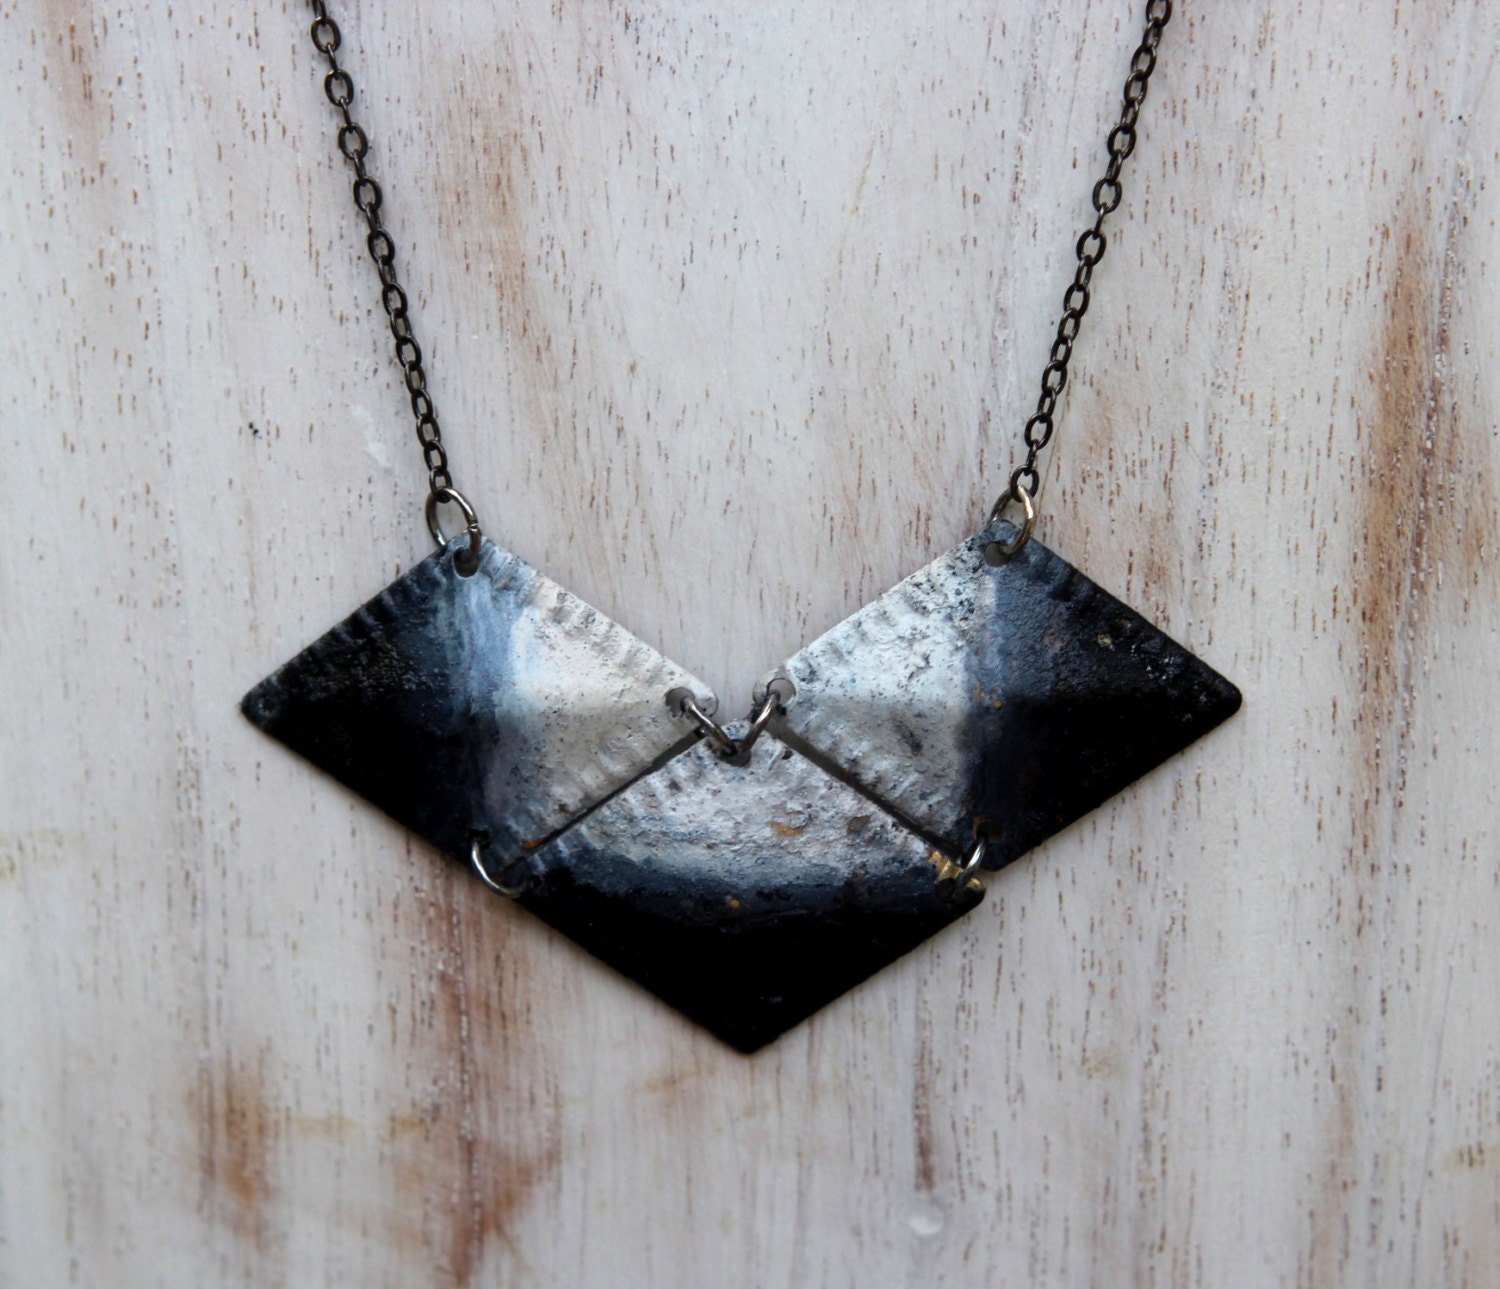 CIJ Charcoal Ombre Necklace - Geometric Diamonds in Black, Gray, Ash, White Gradient - Rustic Armor - Hand Patina - Summer Fashion - Gift B - MySelvagedLife